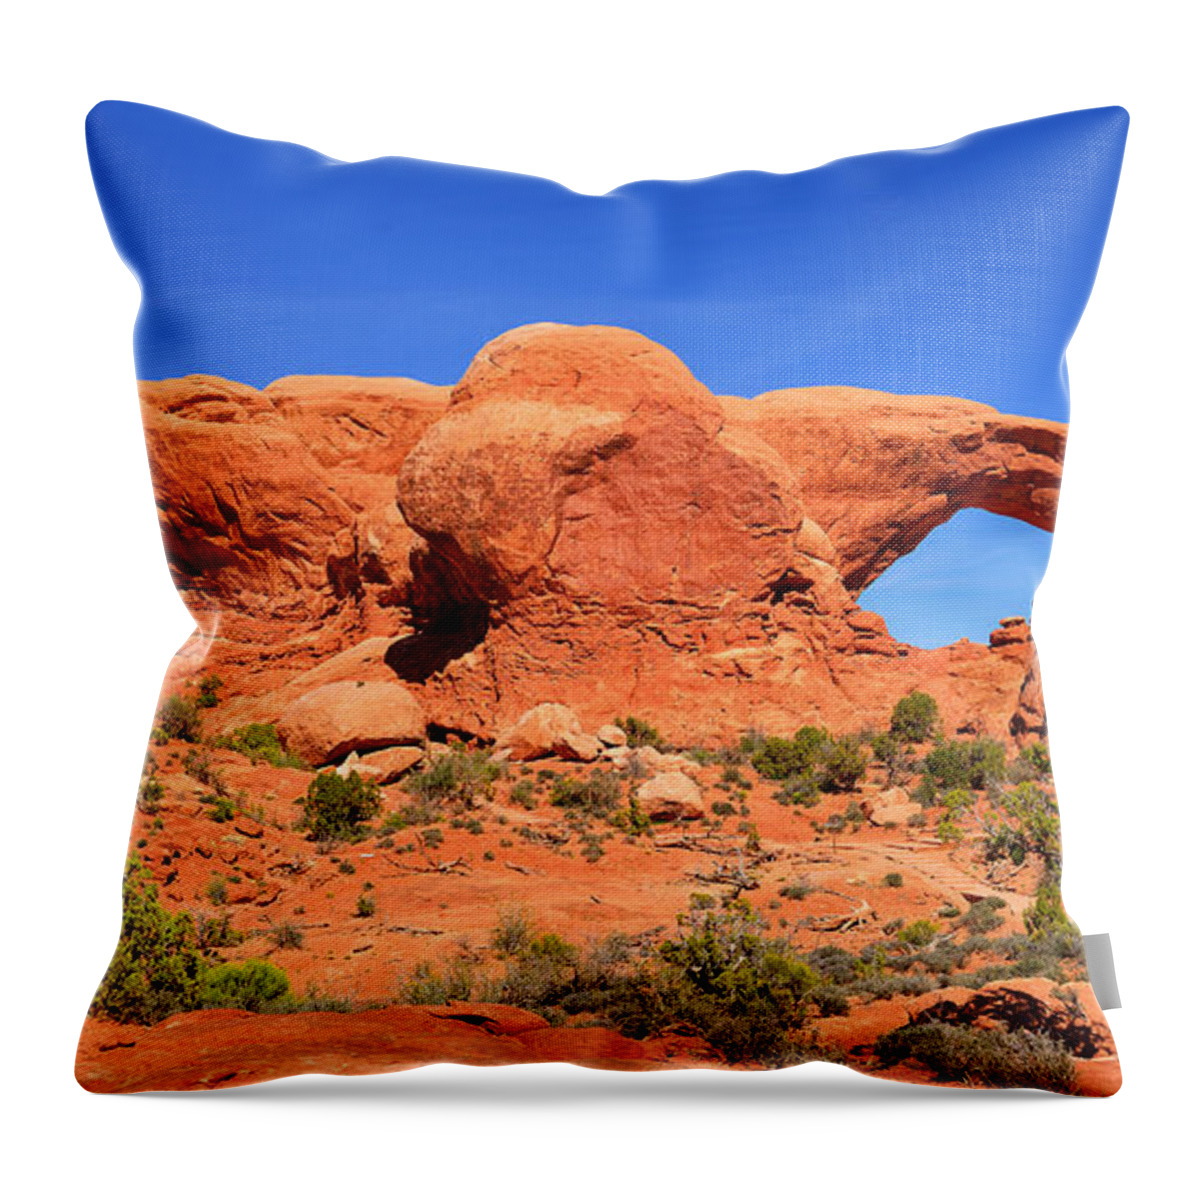 Windows Throw Pillow featuring the photograph Window Eyes by Greg Norrell